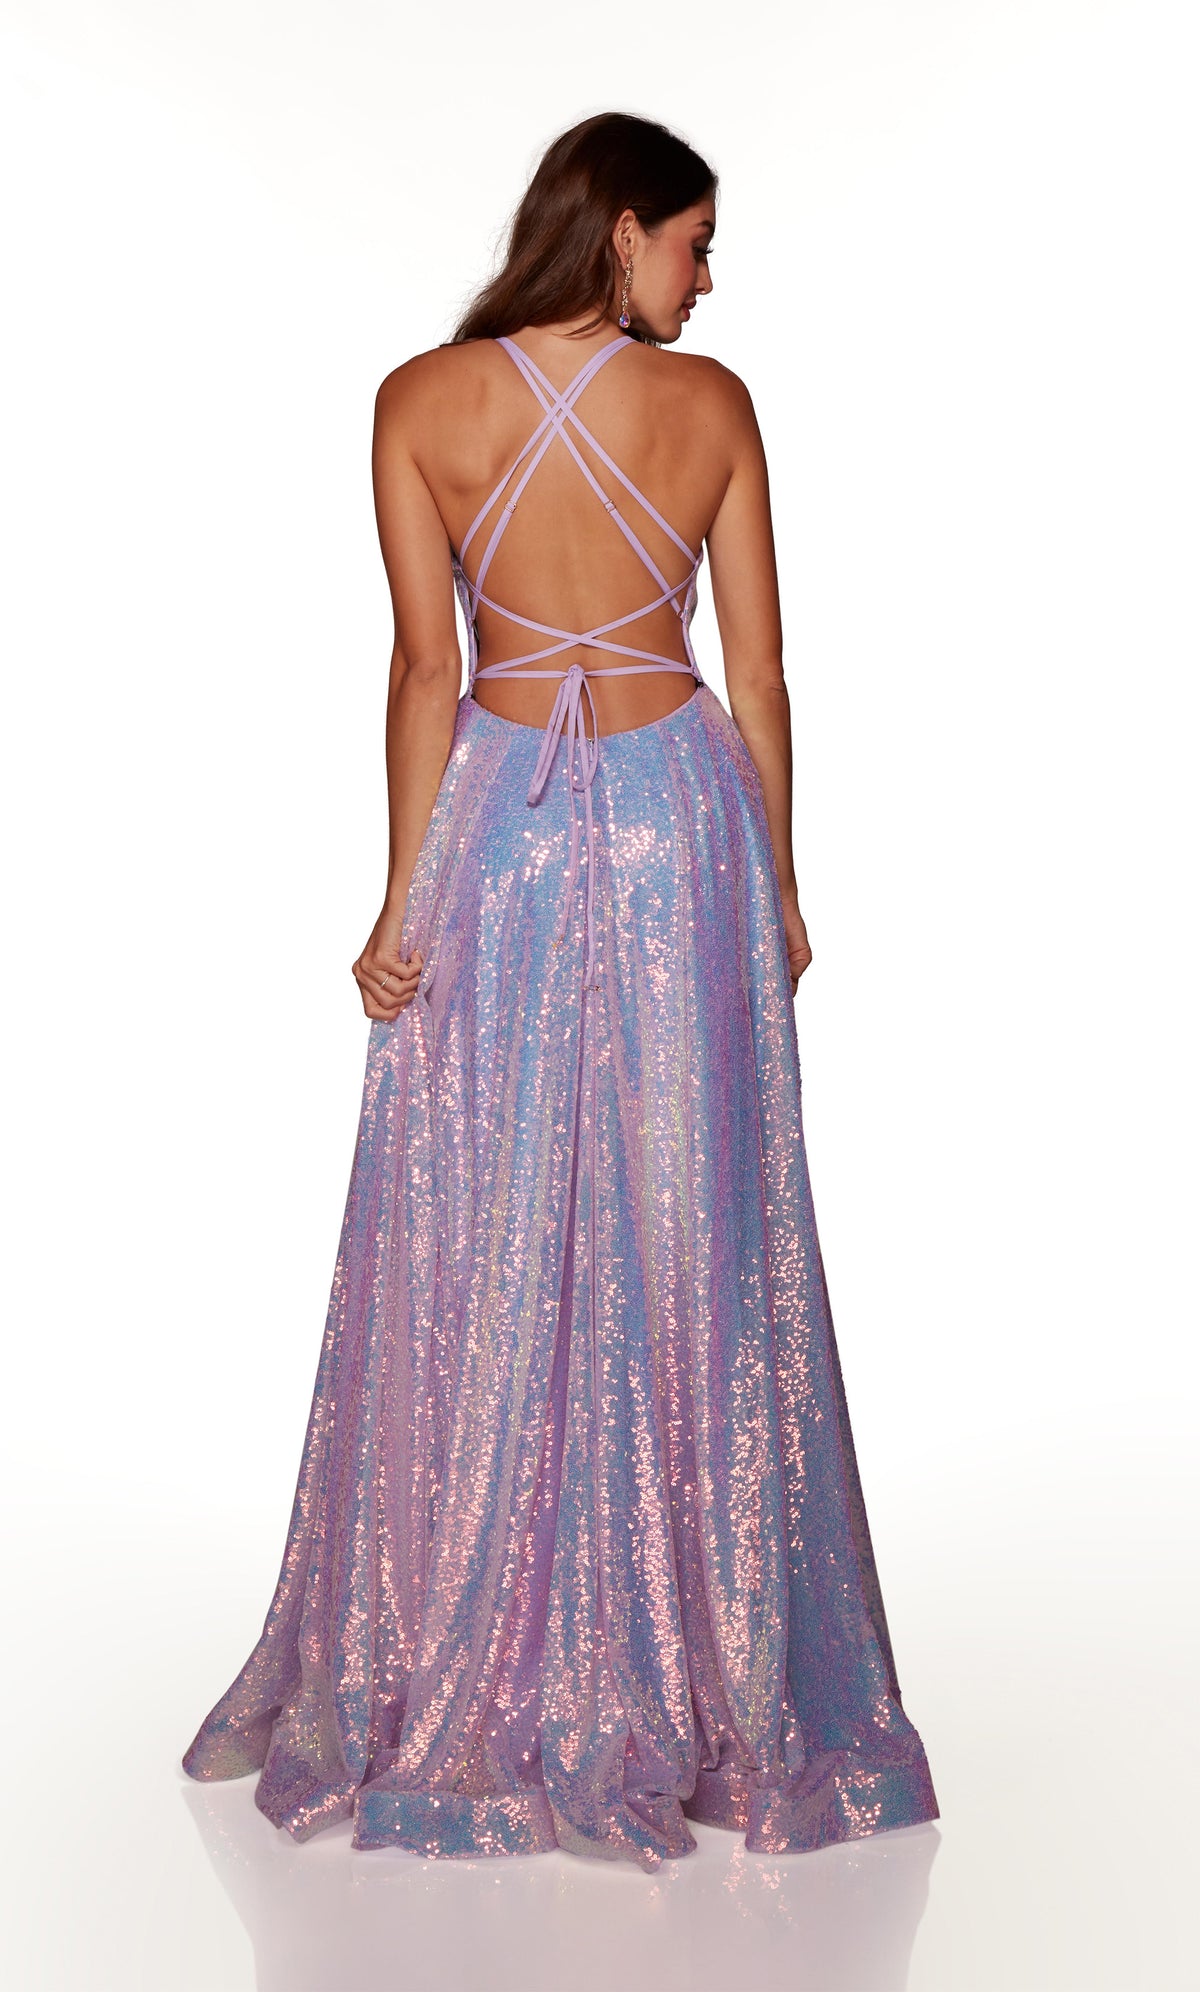 Sparkly gown with a strappy back in purple iridescent sequins.